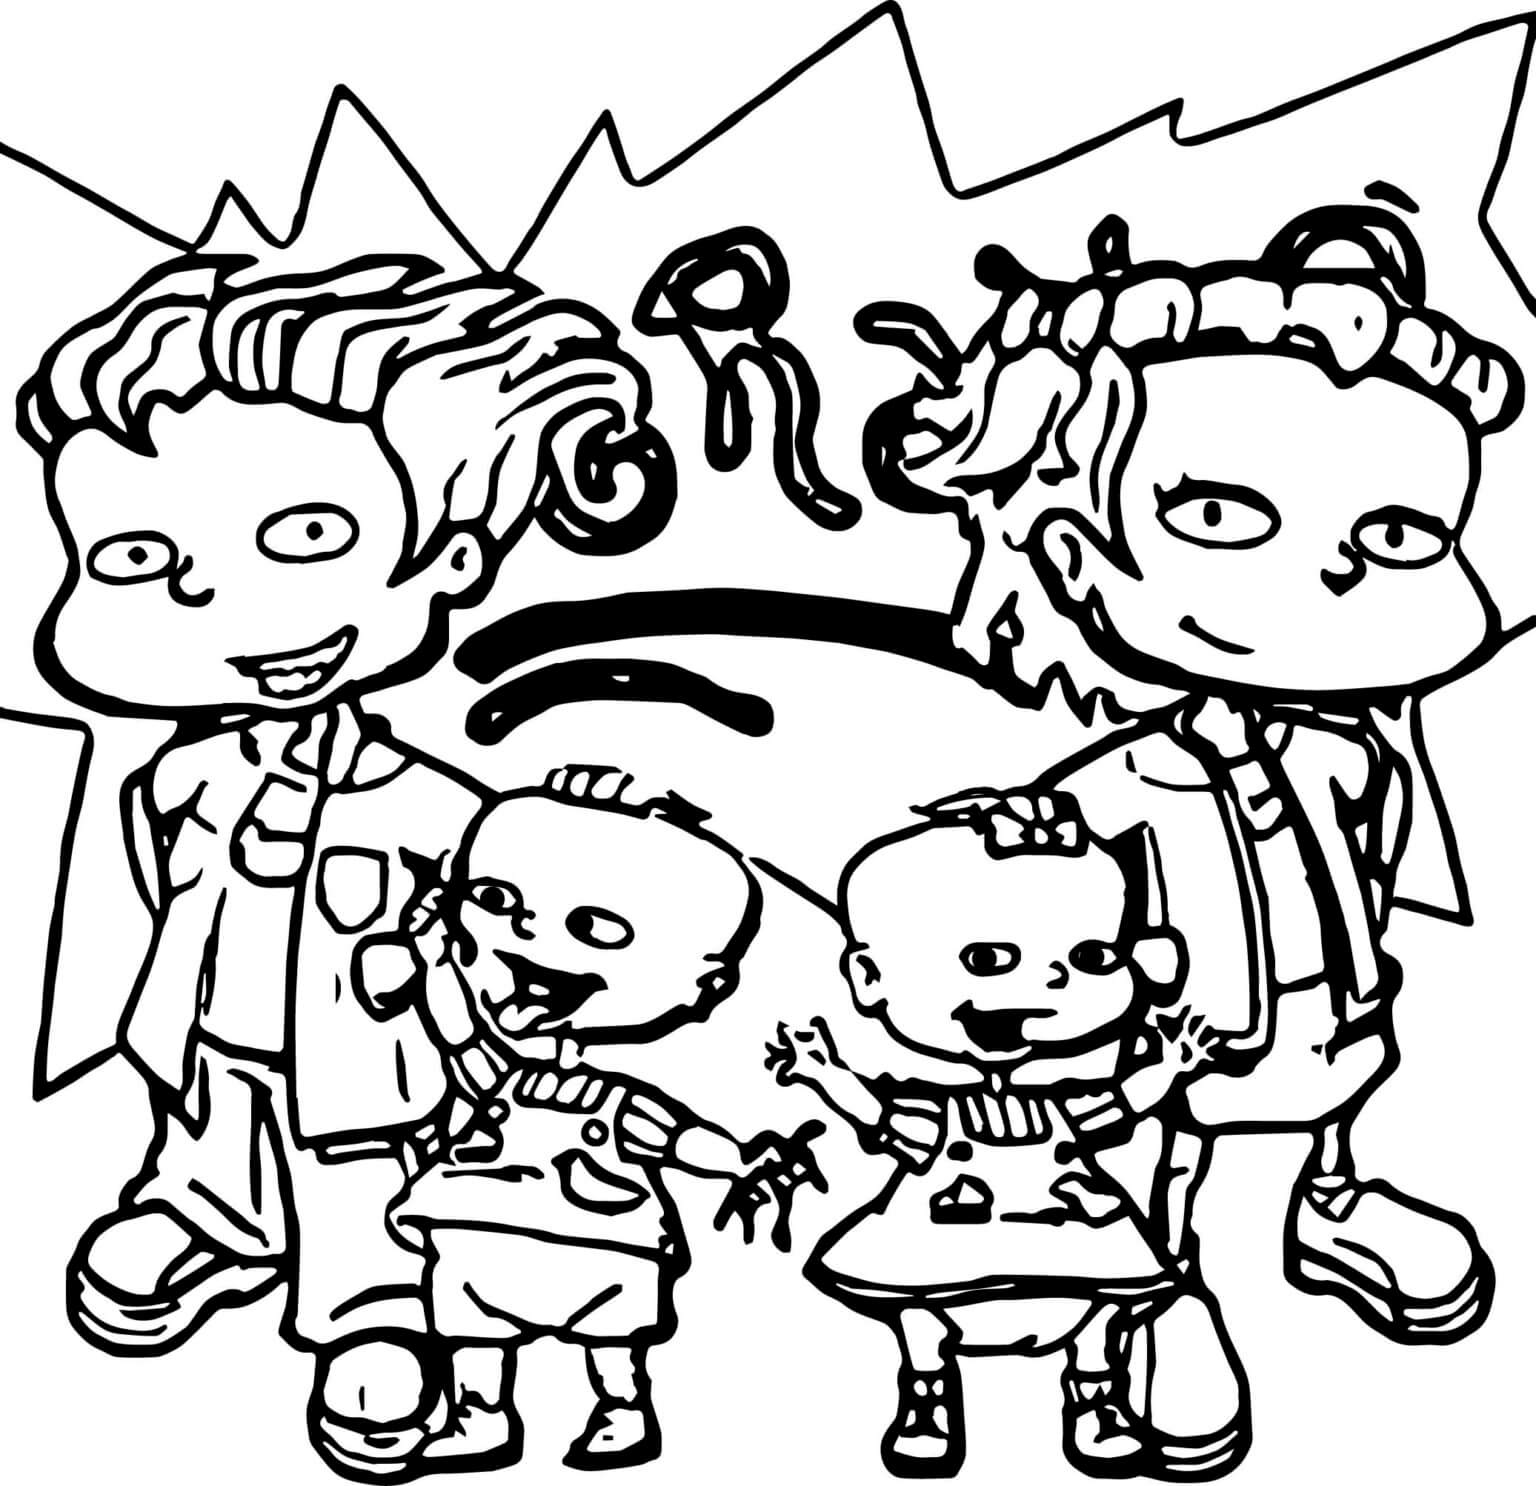 Drawing four characters from rugrats coloring page